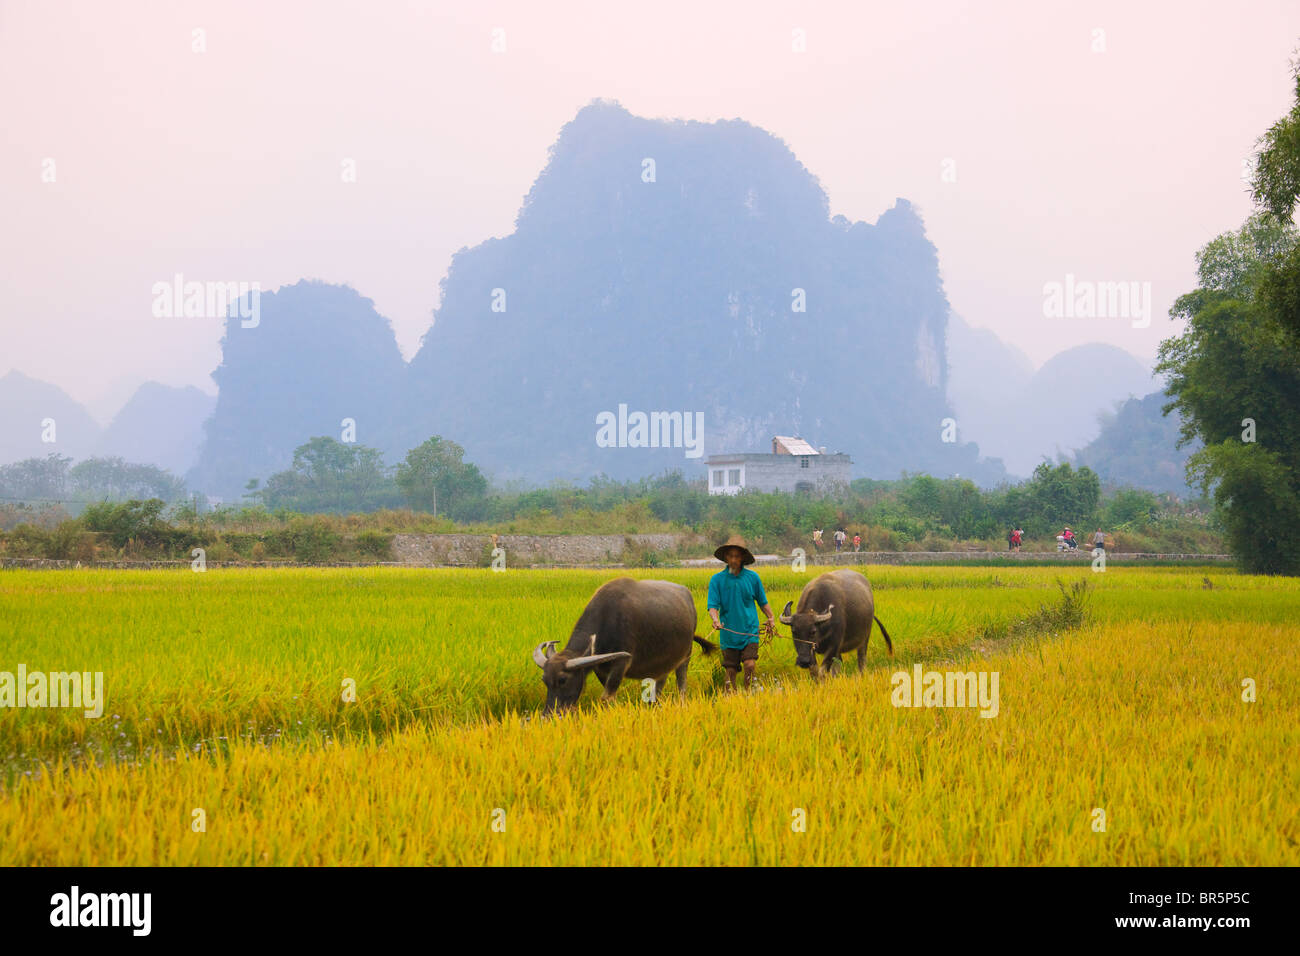 Elderly farmer with water buffaloes in the rice paddy, karst hills in the distance, Yangshuo, Guangxi, China Stock Photo